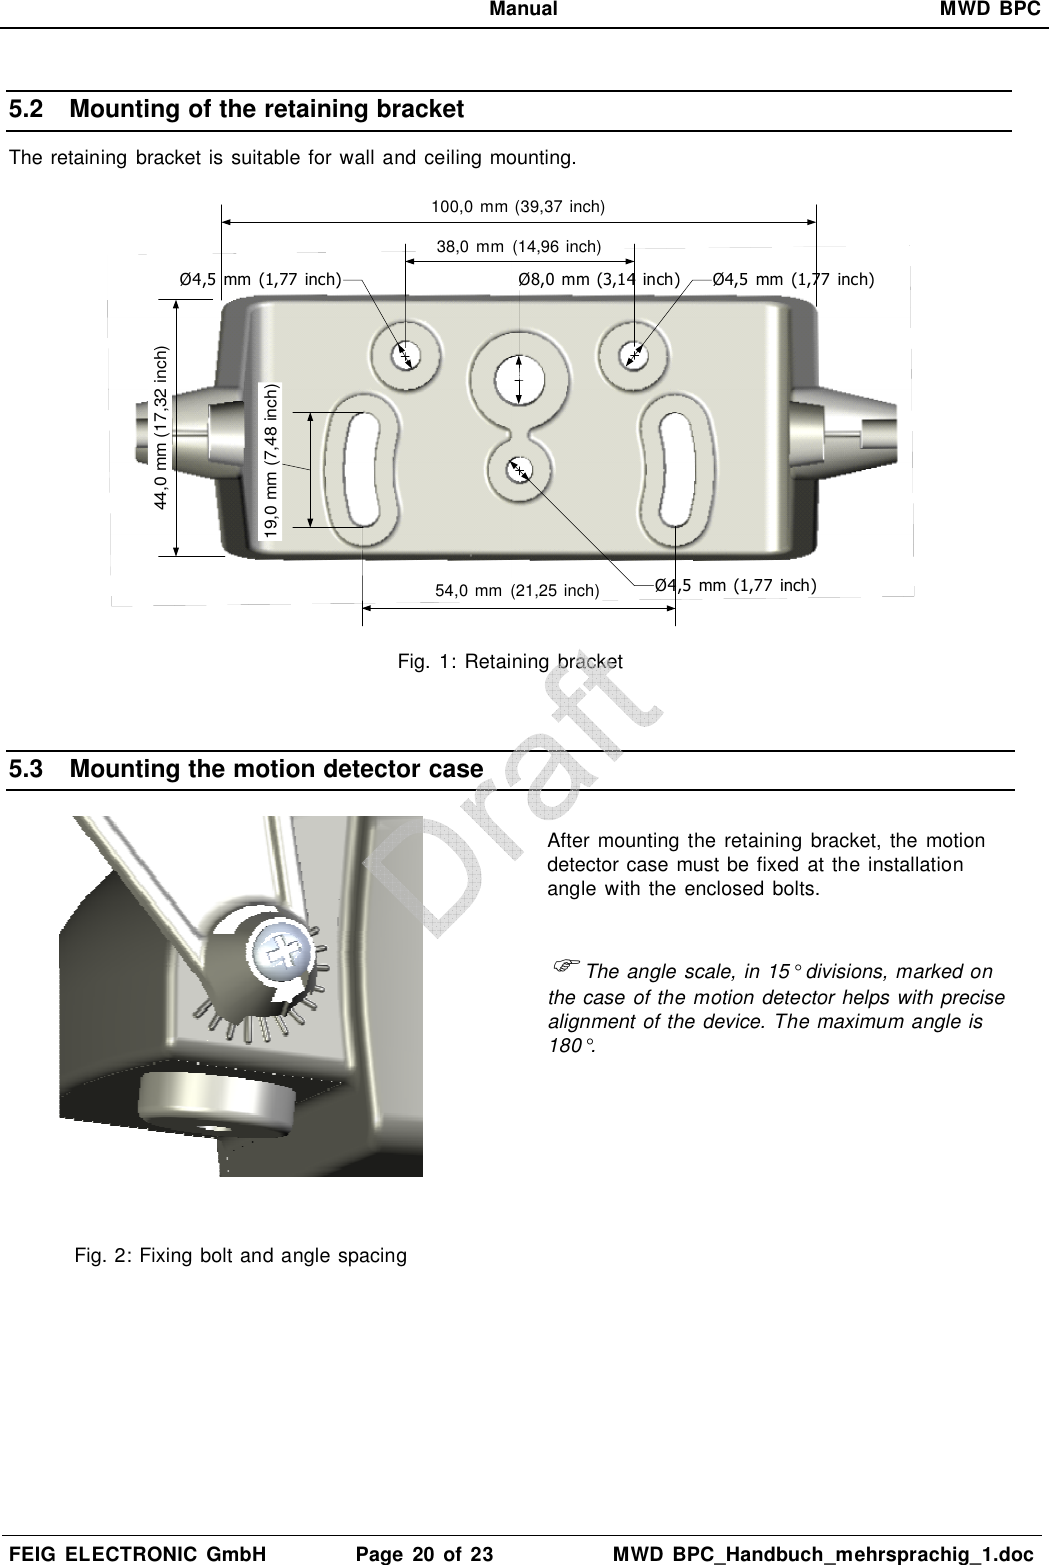   Manual  MWD  BPC  FEIG  ELECTRONIC  GmbH  Page  20  of 23  MWD  BPC_Handbuch_mehrsprachig_1.doc  5.2  Mounting of the retaining bracket The retaining bracket is suitable for wall and ceiling mounting.  Ø4,5  mm  (1,77  inch) Ø4,5  mm  (1,77  inch)Ø8,0 mm (3,14  inch)Ø4,5  mm (1,77  inch)54,0 mm  (21,25 inch)38,0  mm  (14,96 inch)19,0 mm (7,48 inch)100,0 mm (39,37 inch)44,0 mm (17,32 inch) Fig.  1: Retaining  bracket  5.3  Mounting the motion detector case   Fig. 2: Fixing bolt and angle spacing  After mounting  the retaining  bracket,  the motion detector case must be fixed at the installation angle  with the  enclosed bolts.   The angle scale, in 15° divisions, marked on the case of the motion detector helps with precise alignment of the device. The maximum angle is 180°.  